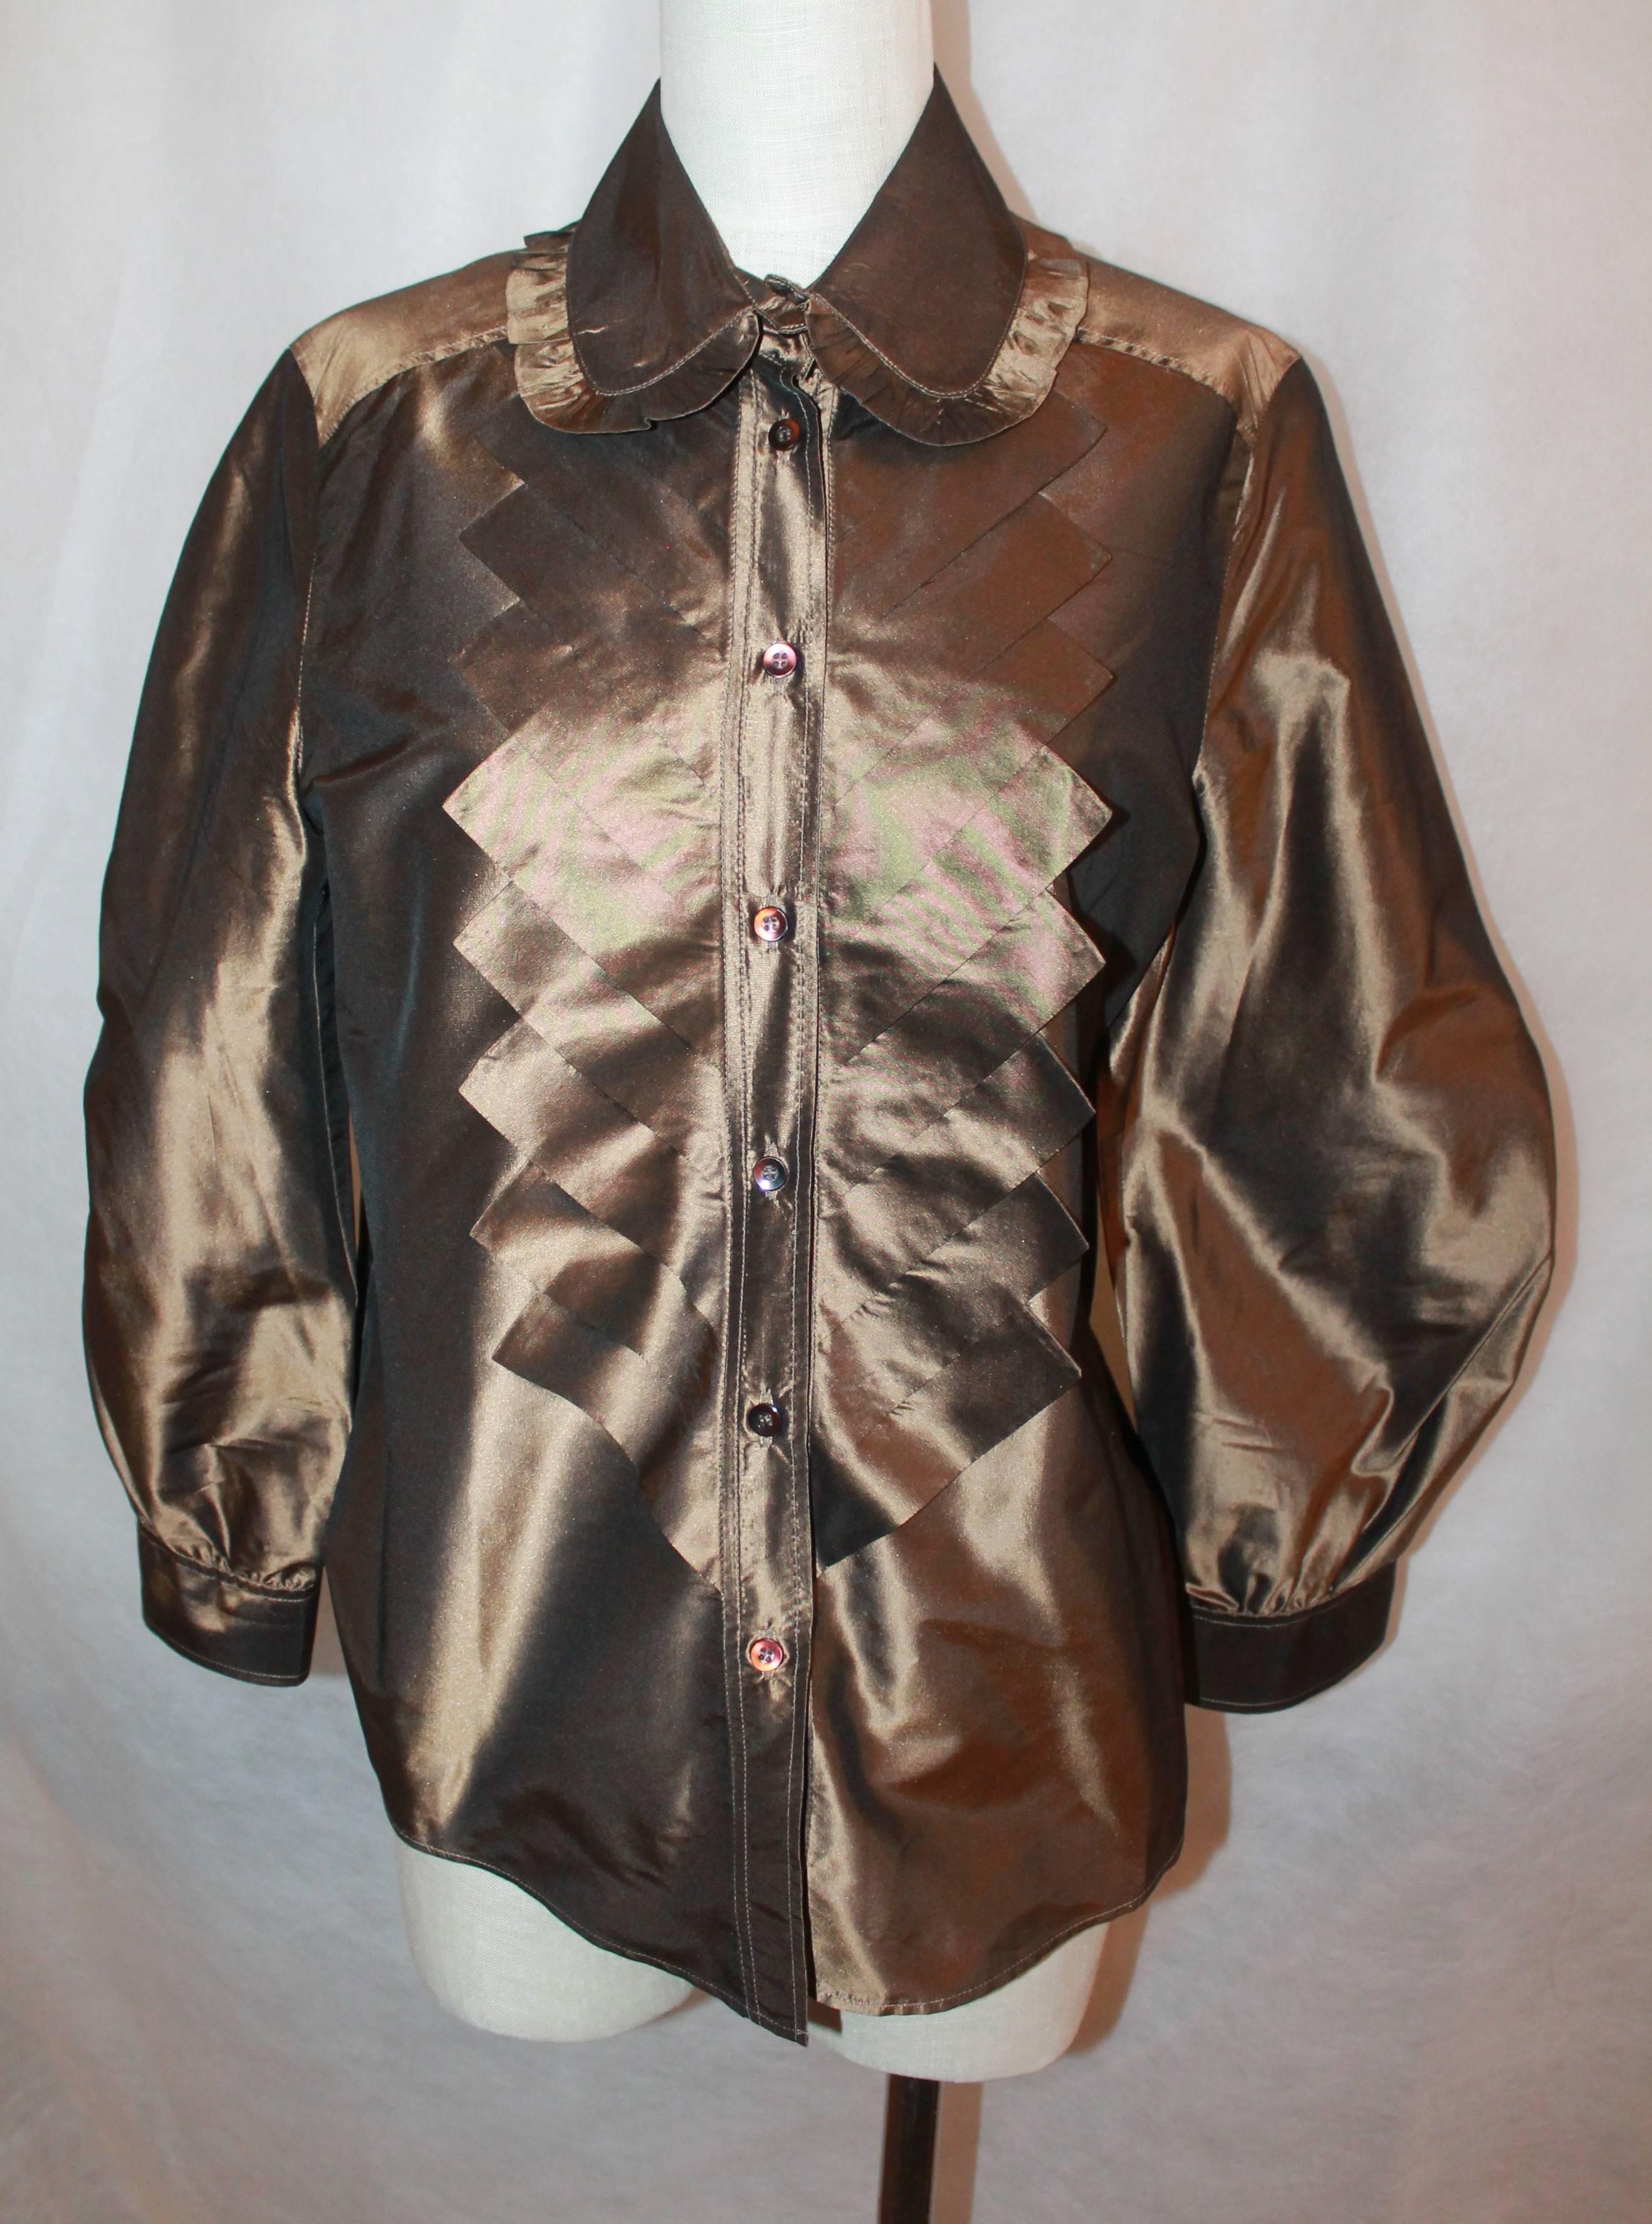 Oscar de la Renta Bronze Blouse - 12

This Oscar blouse is made of silk taffeta and is in excellent condition. It is layered in the front with a chevron fabric design. There is also a ruffle trim on the collar and has large sleeves.